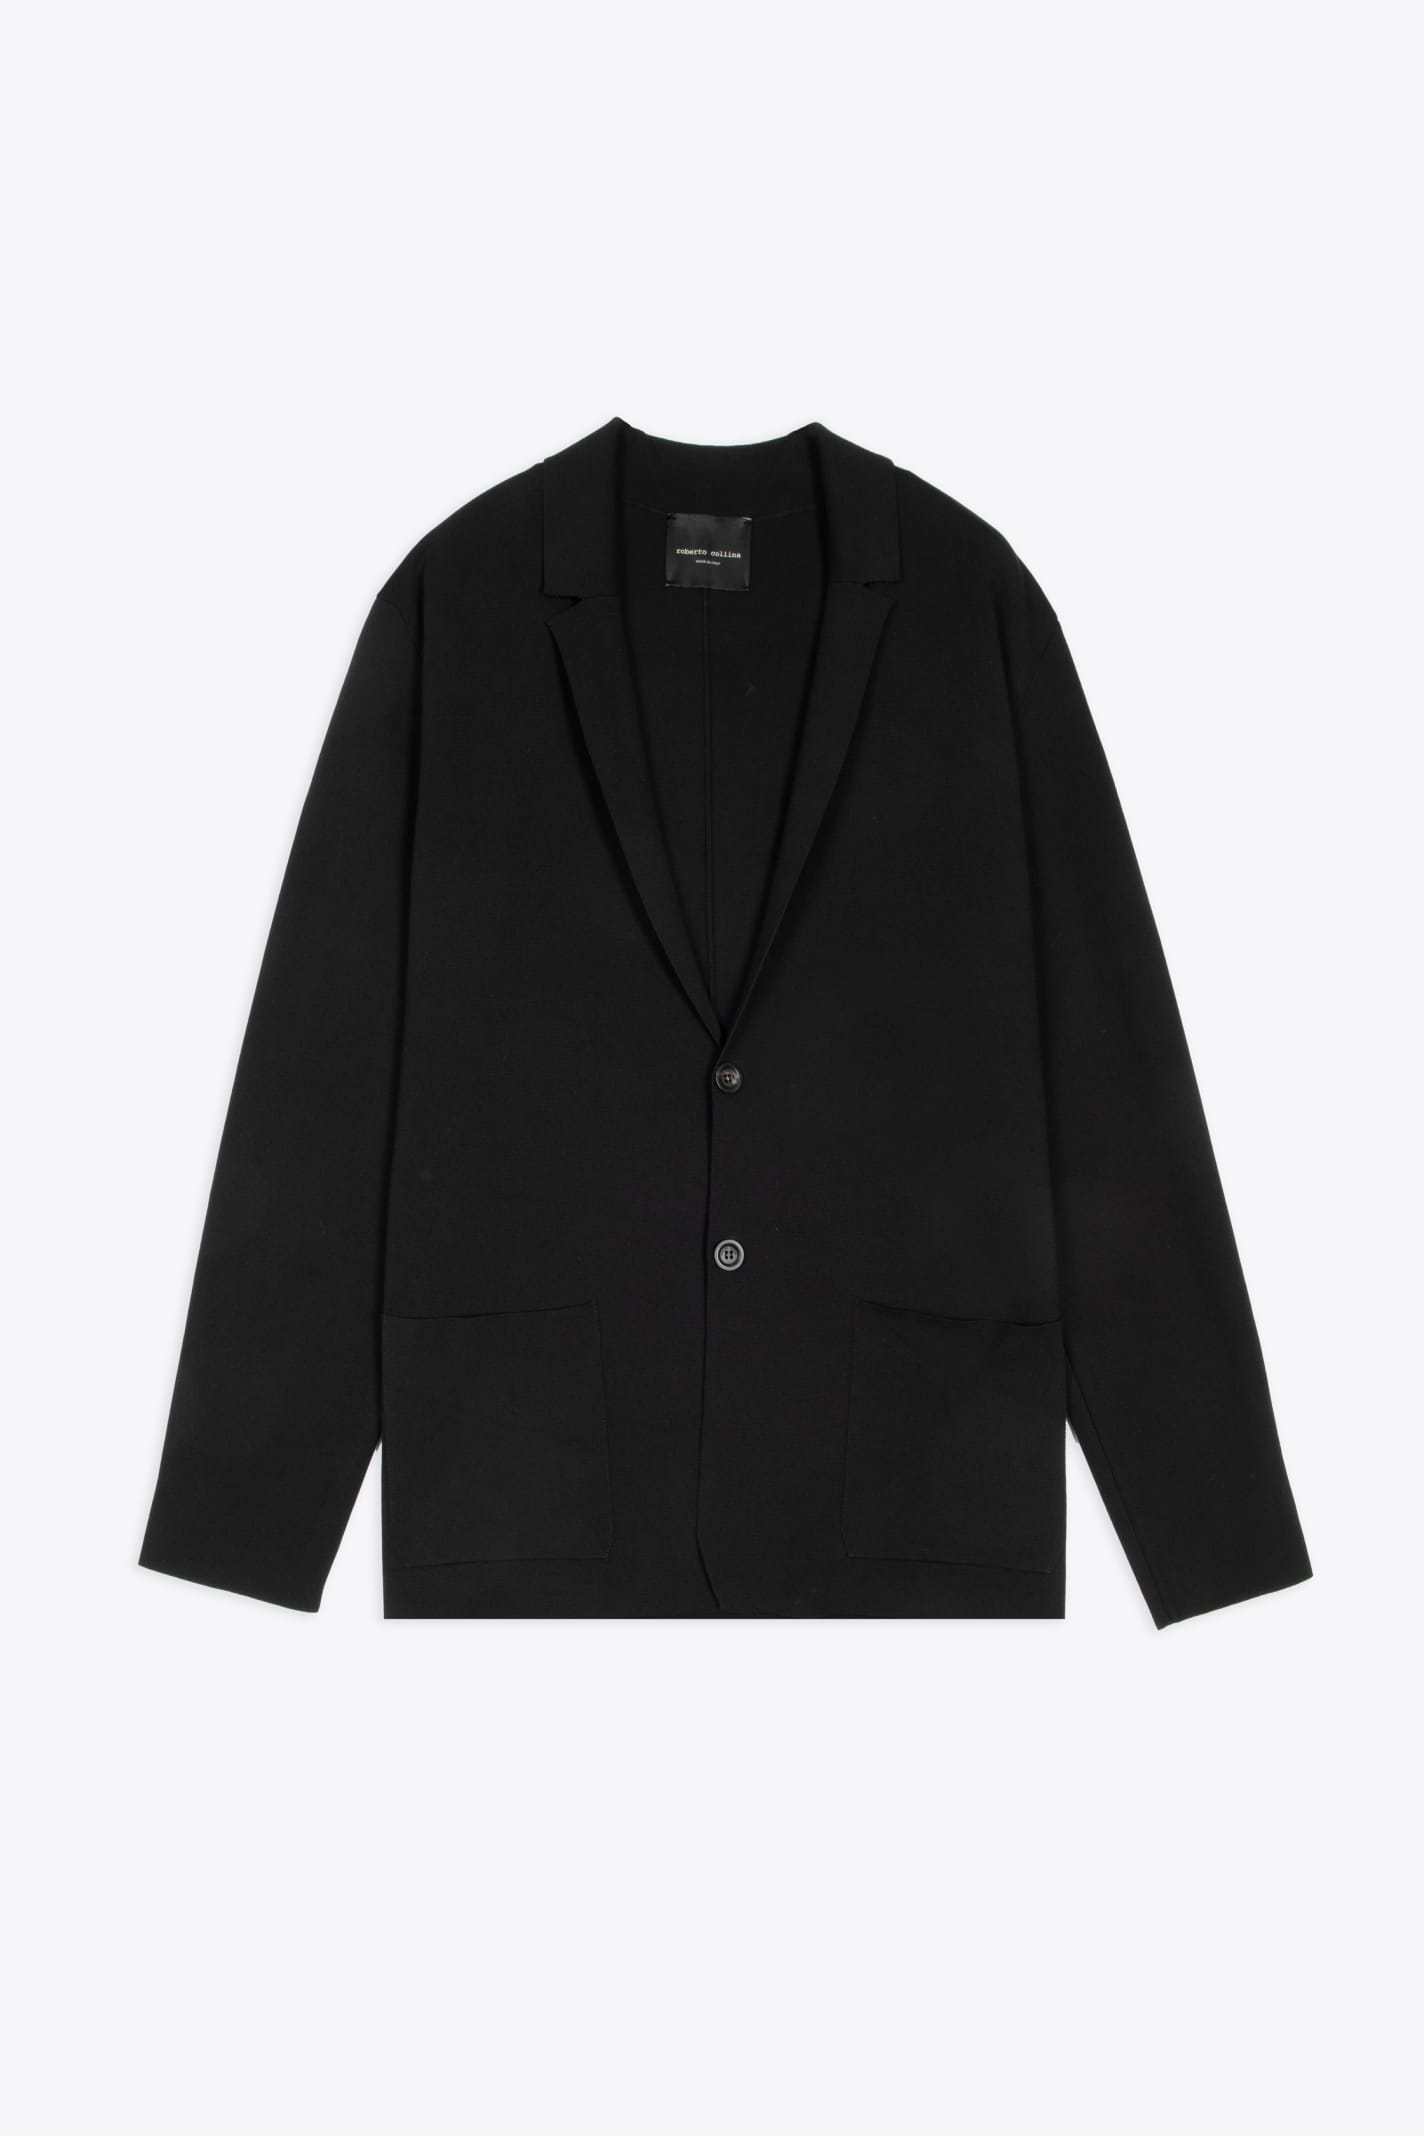 Roberto Collina Giacca Revers Black Cotton Knit Blazer With Patch Pockets In Nero